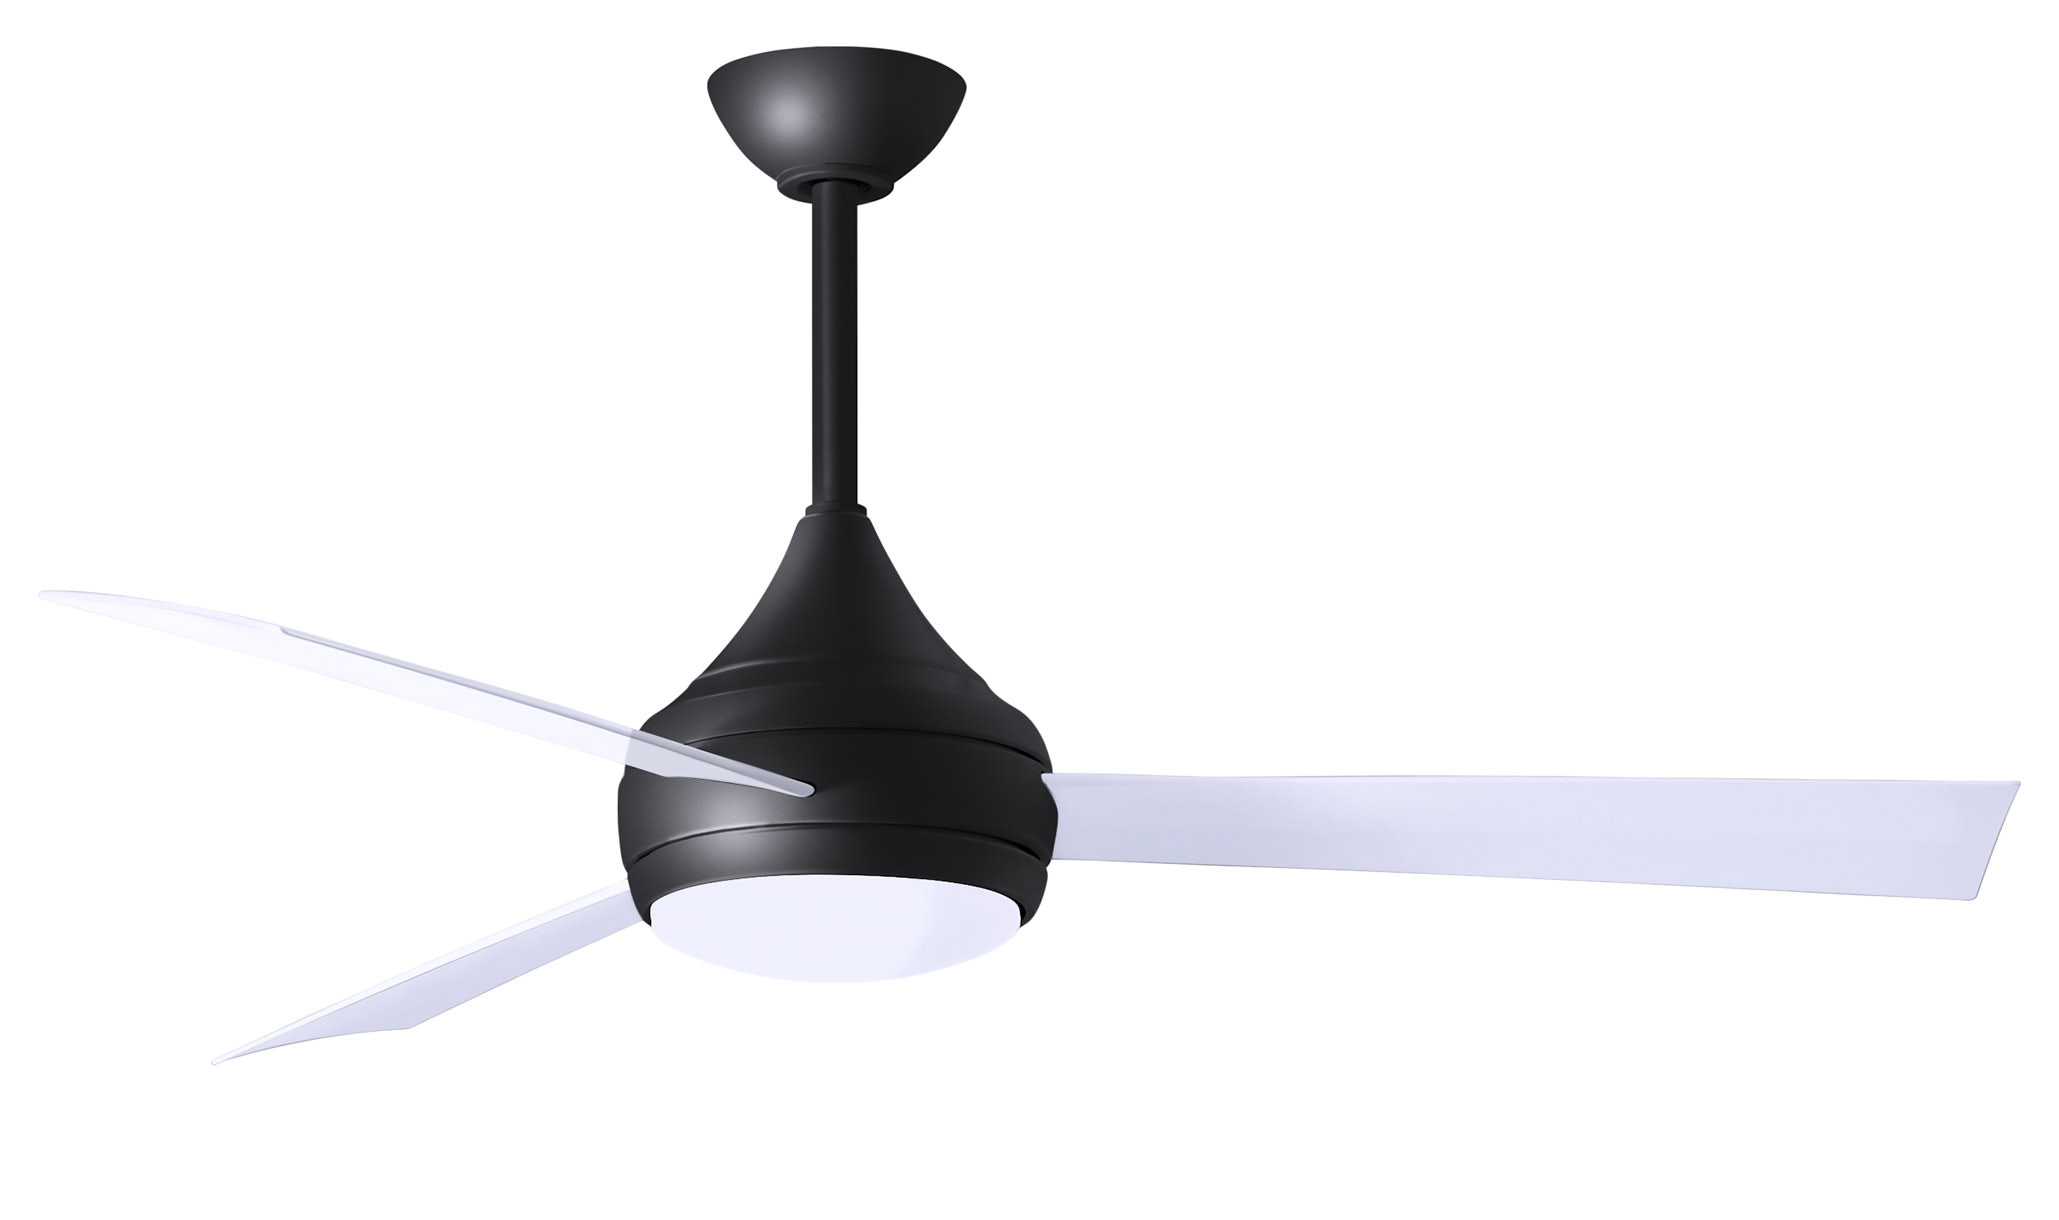 Donaire ceiling fan in Matte Black with Gloss White blades without light cap manufactured by Matthews Fan Company.